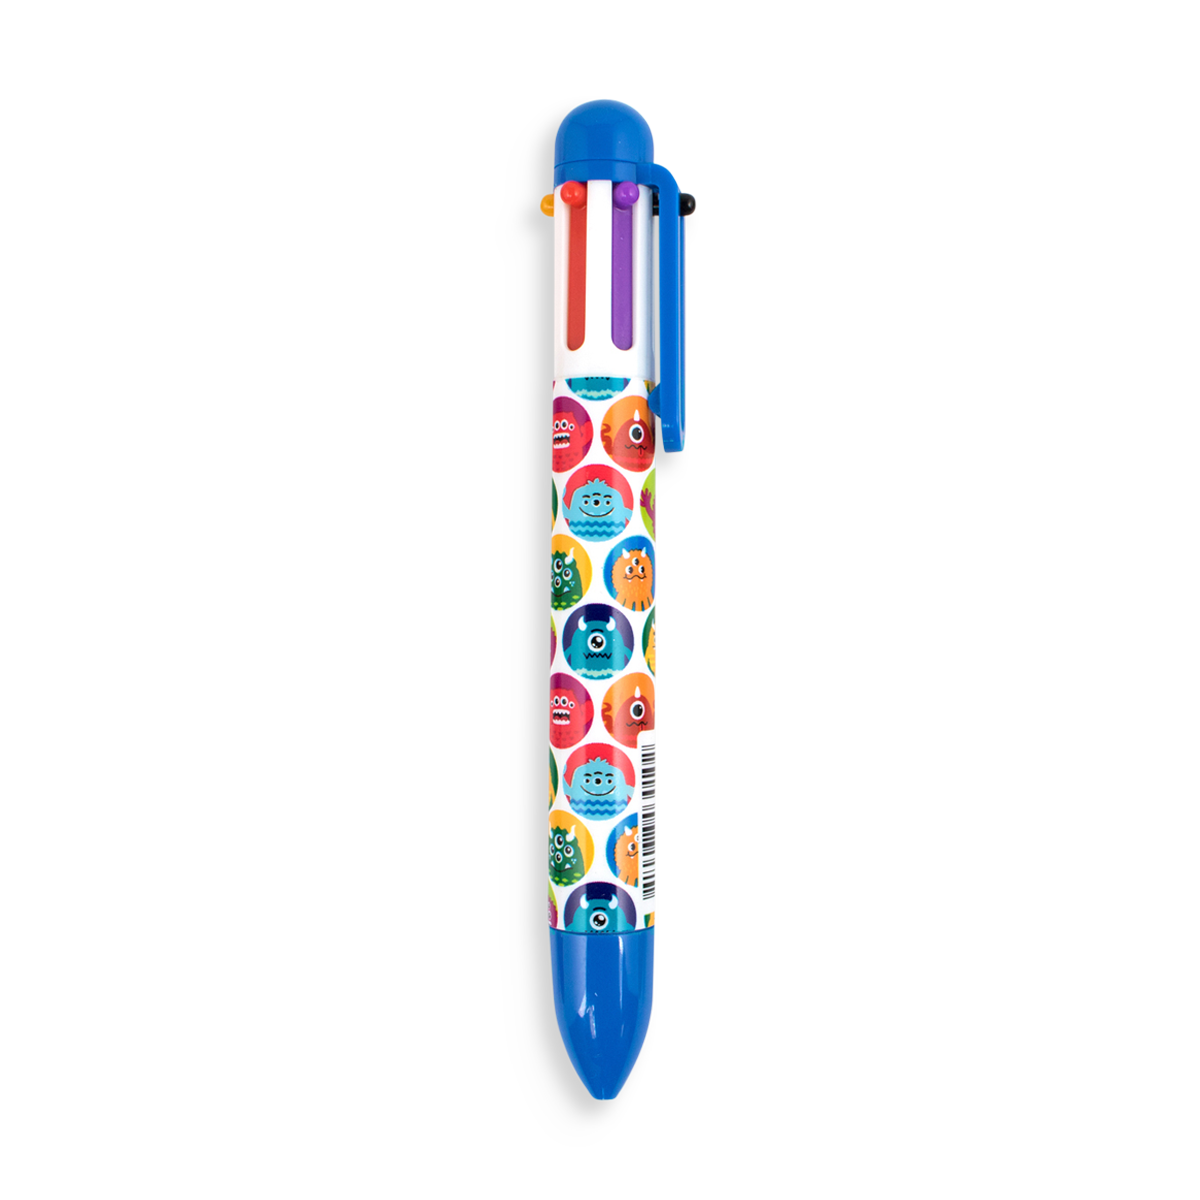 Blue Monster 6 Click multi color pen with 6 different ink colors